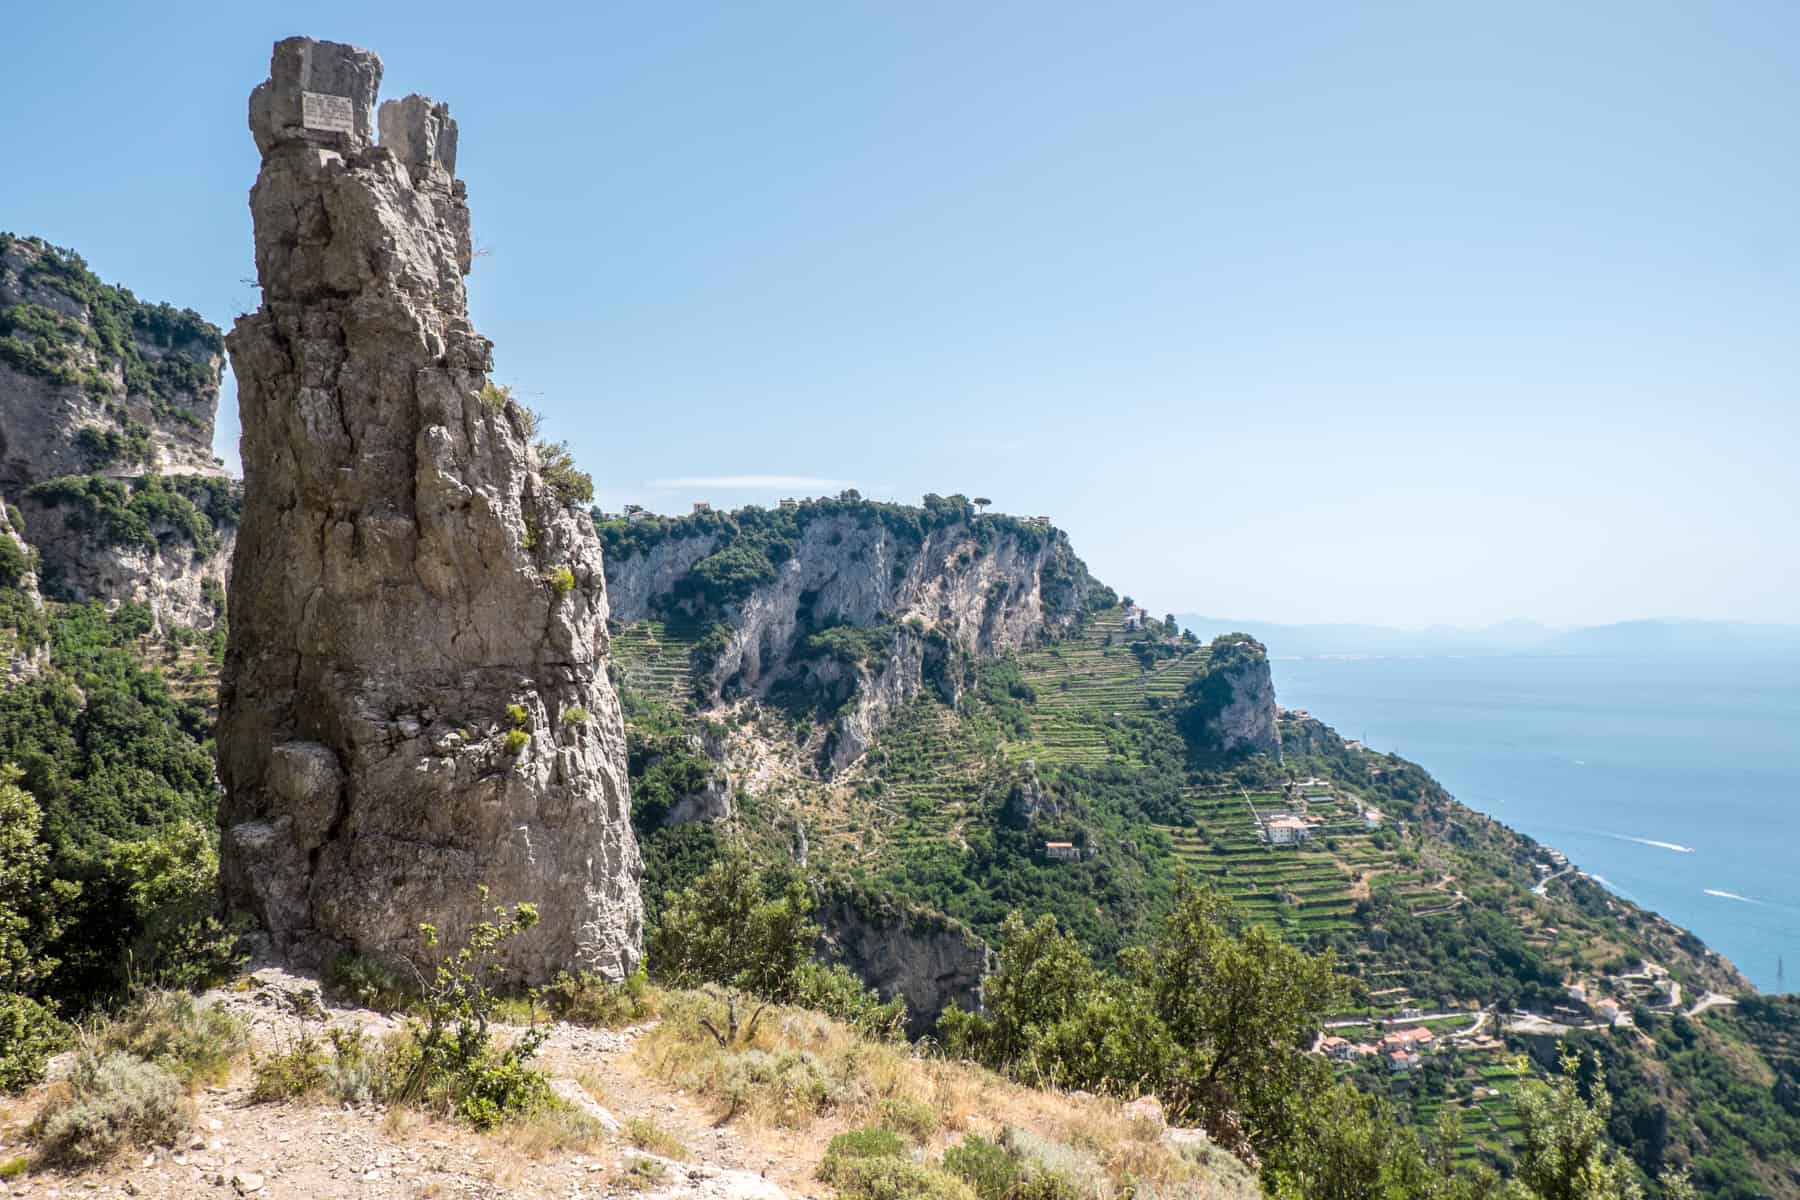 A tall rock on a cliff face in the Latteri Mountains above the Amalfi Coast, Italy. 